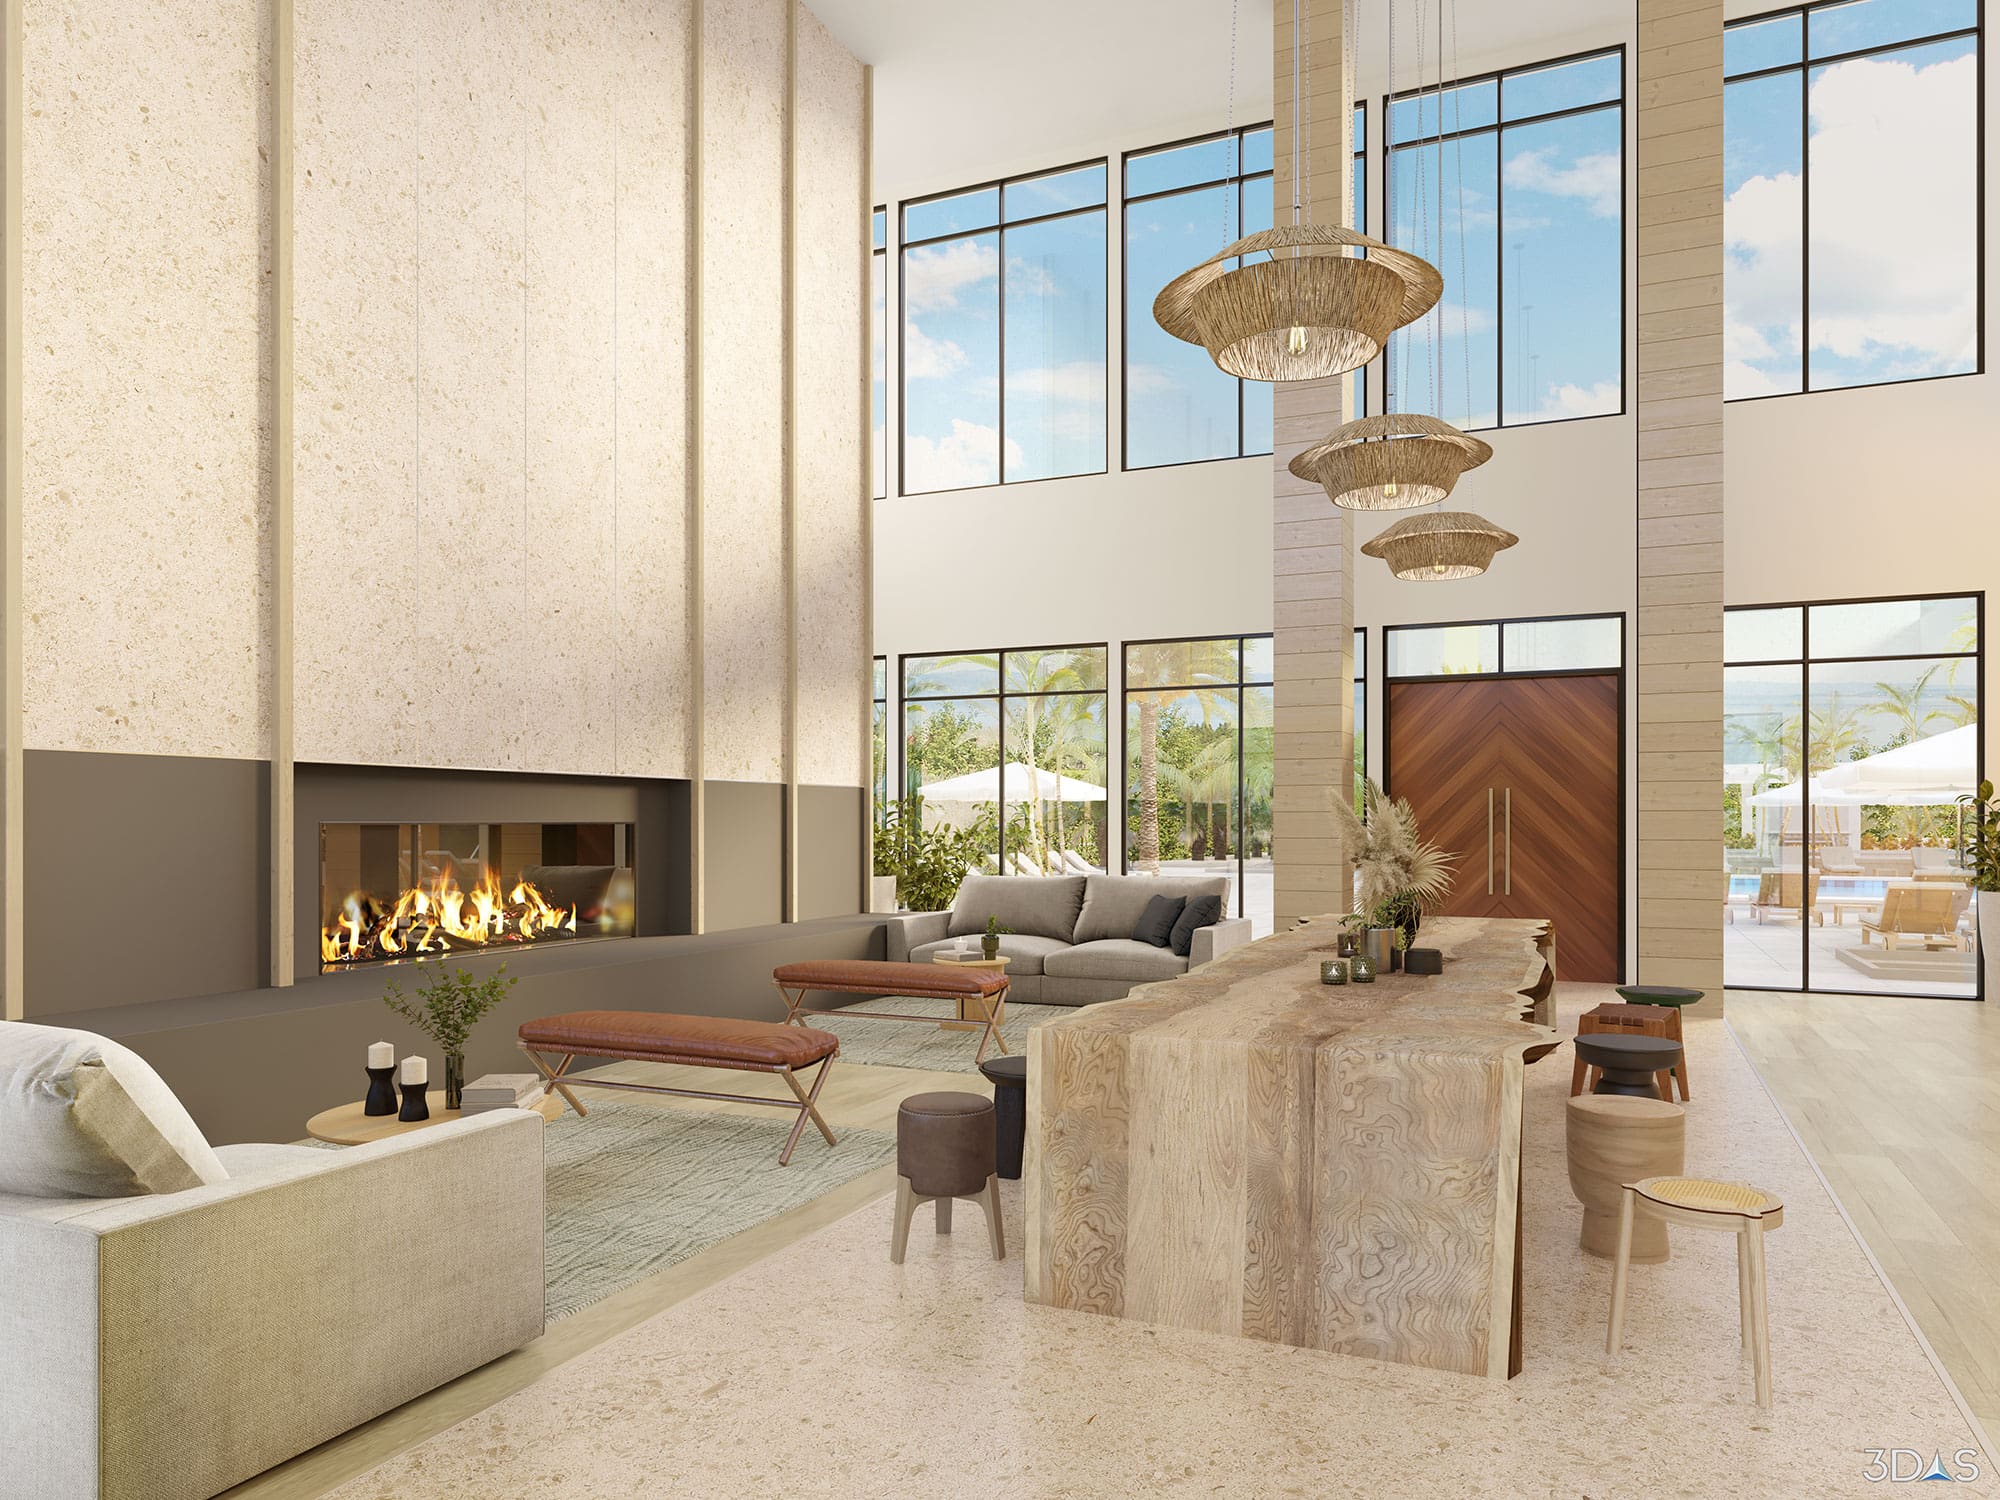 Amenity Center Lobby 3D Rendering for Infield, a 384 Multi-Family Apartment Complex